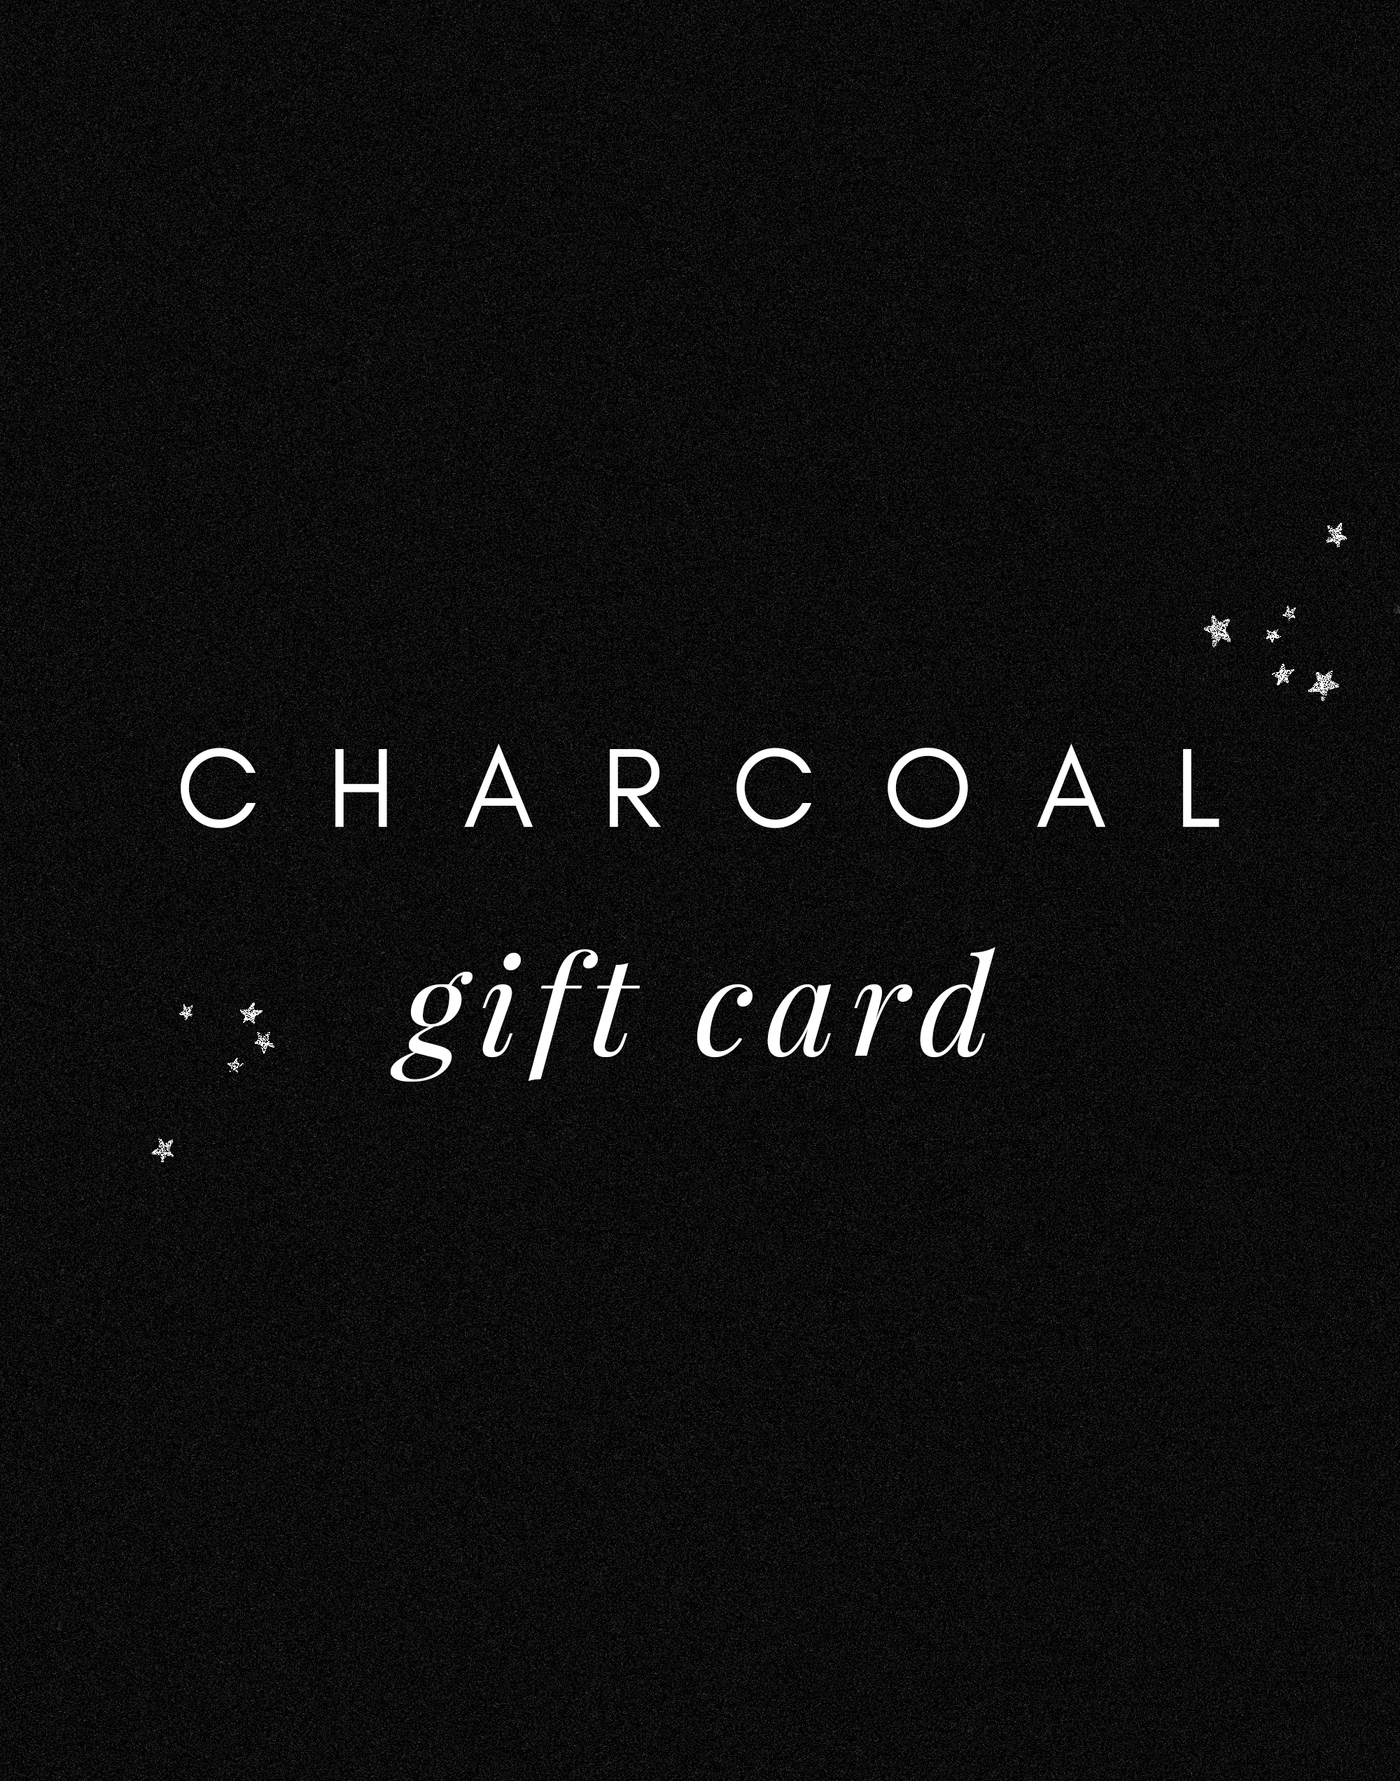  - Women's Gift Card - Charcoal Clothing